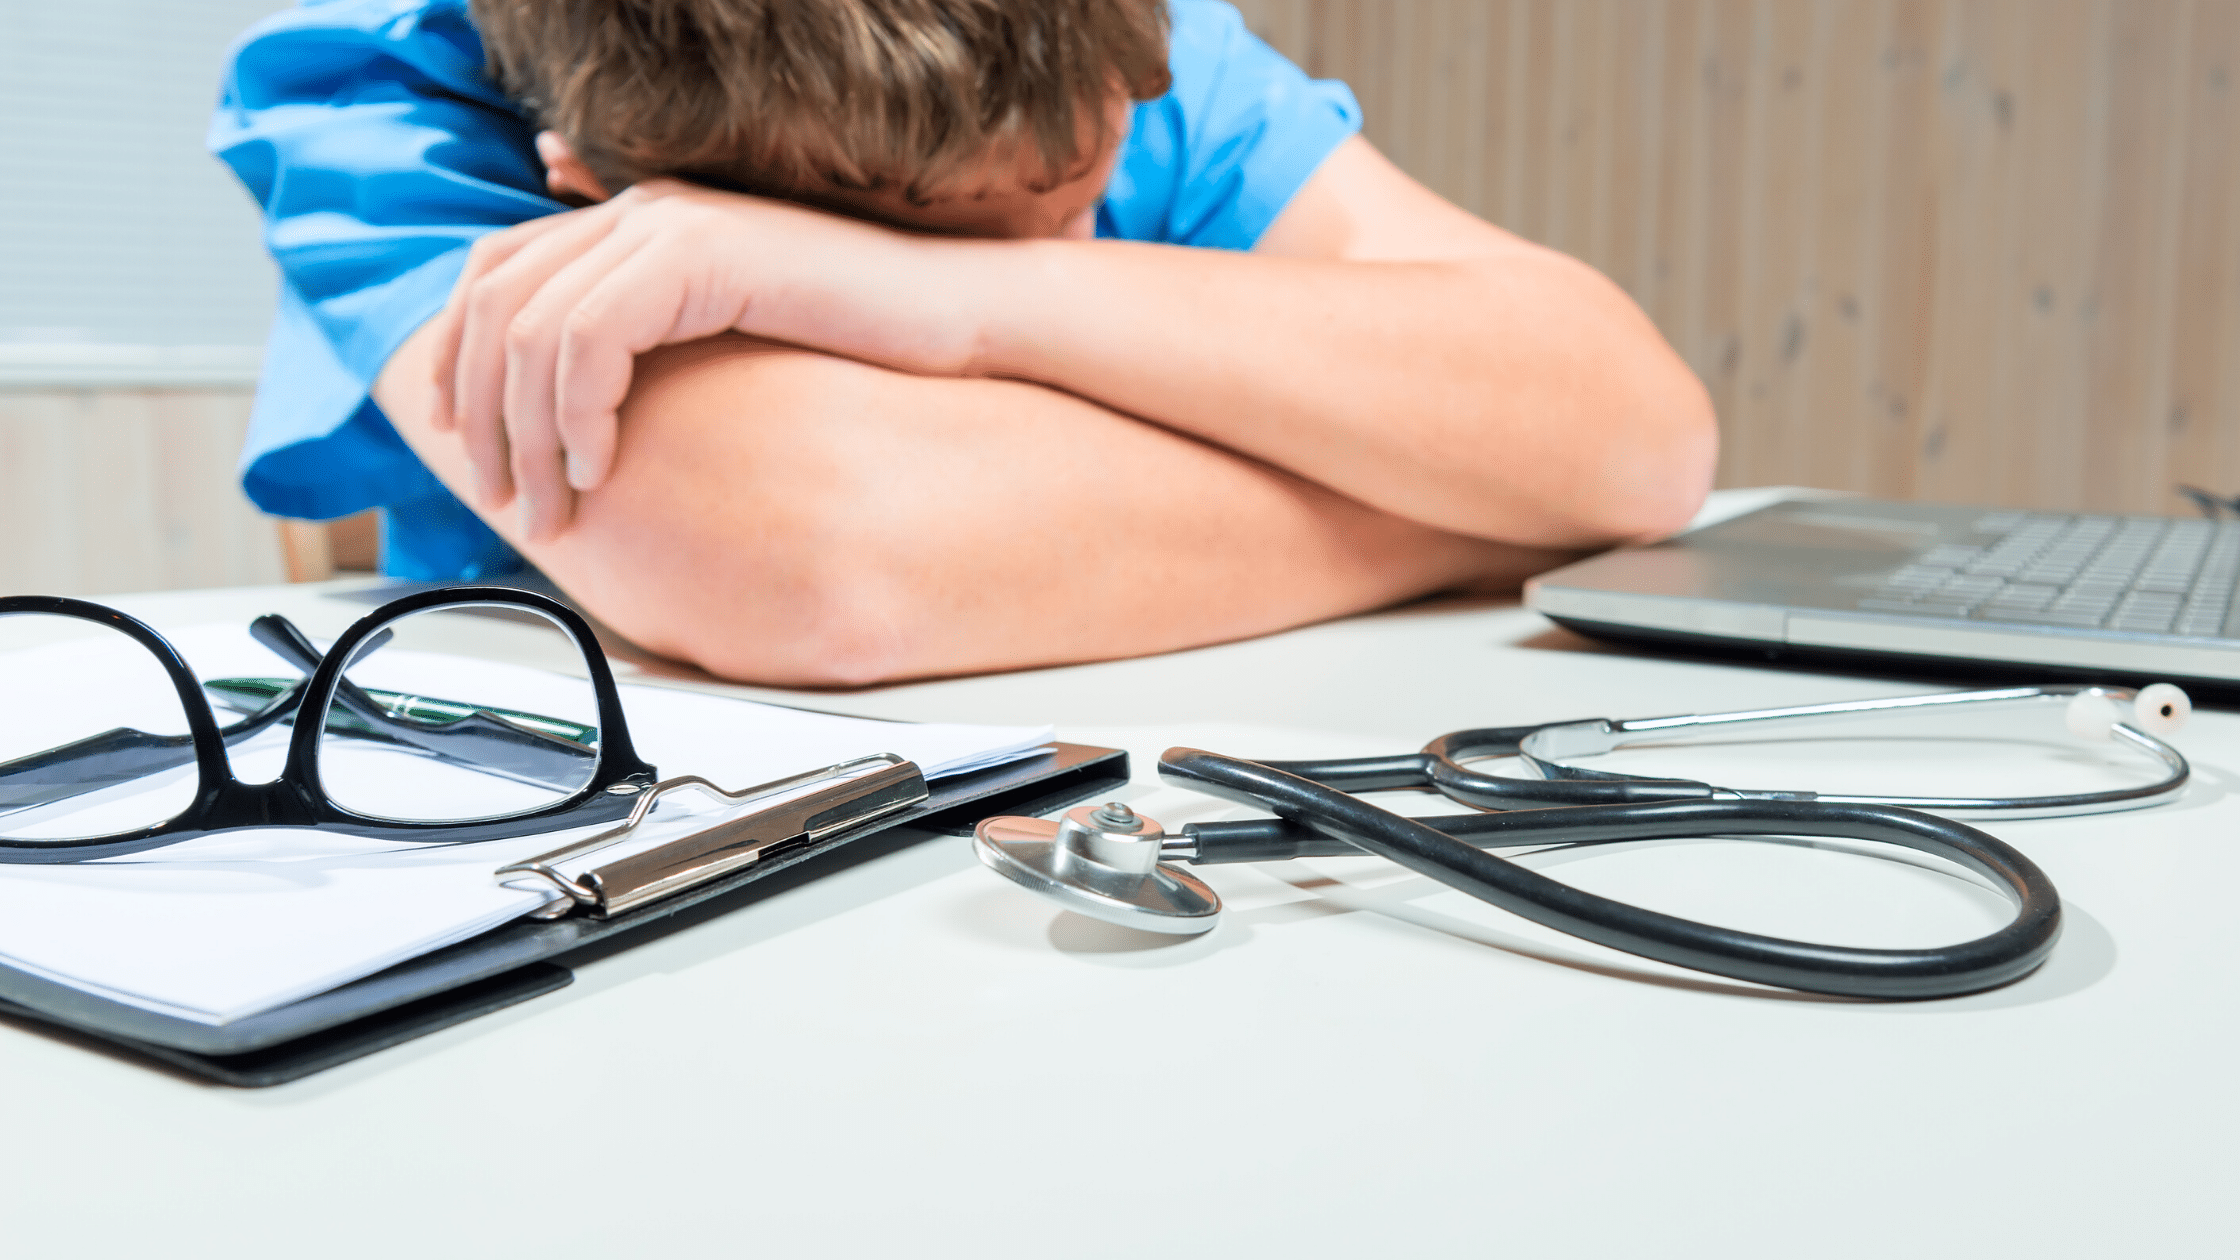 Physician taking a nap on work desk in front of laptop